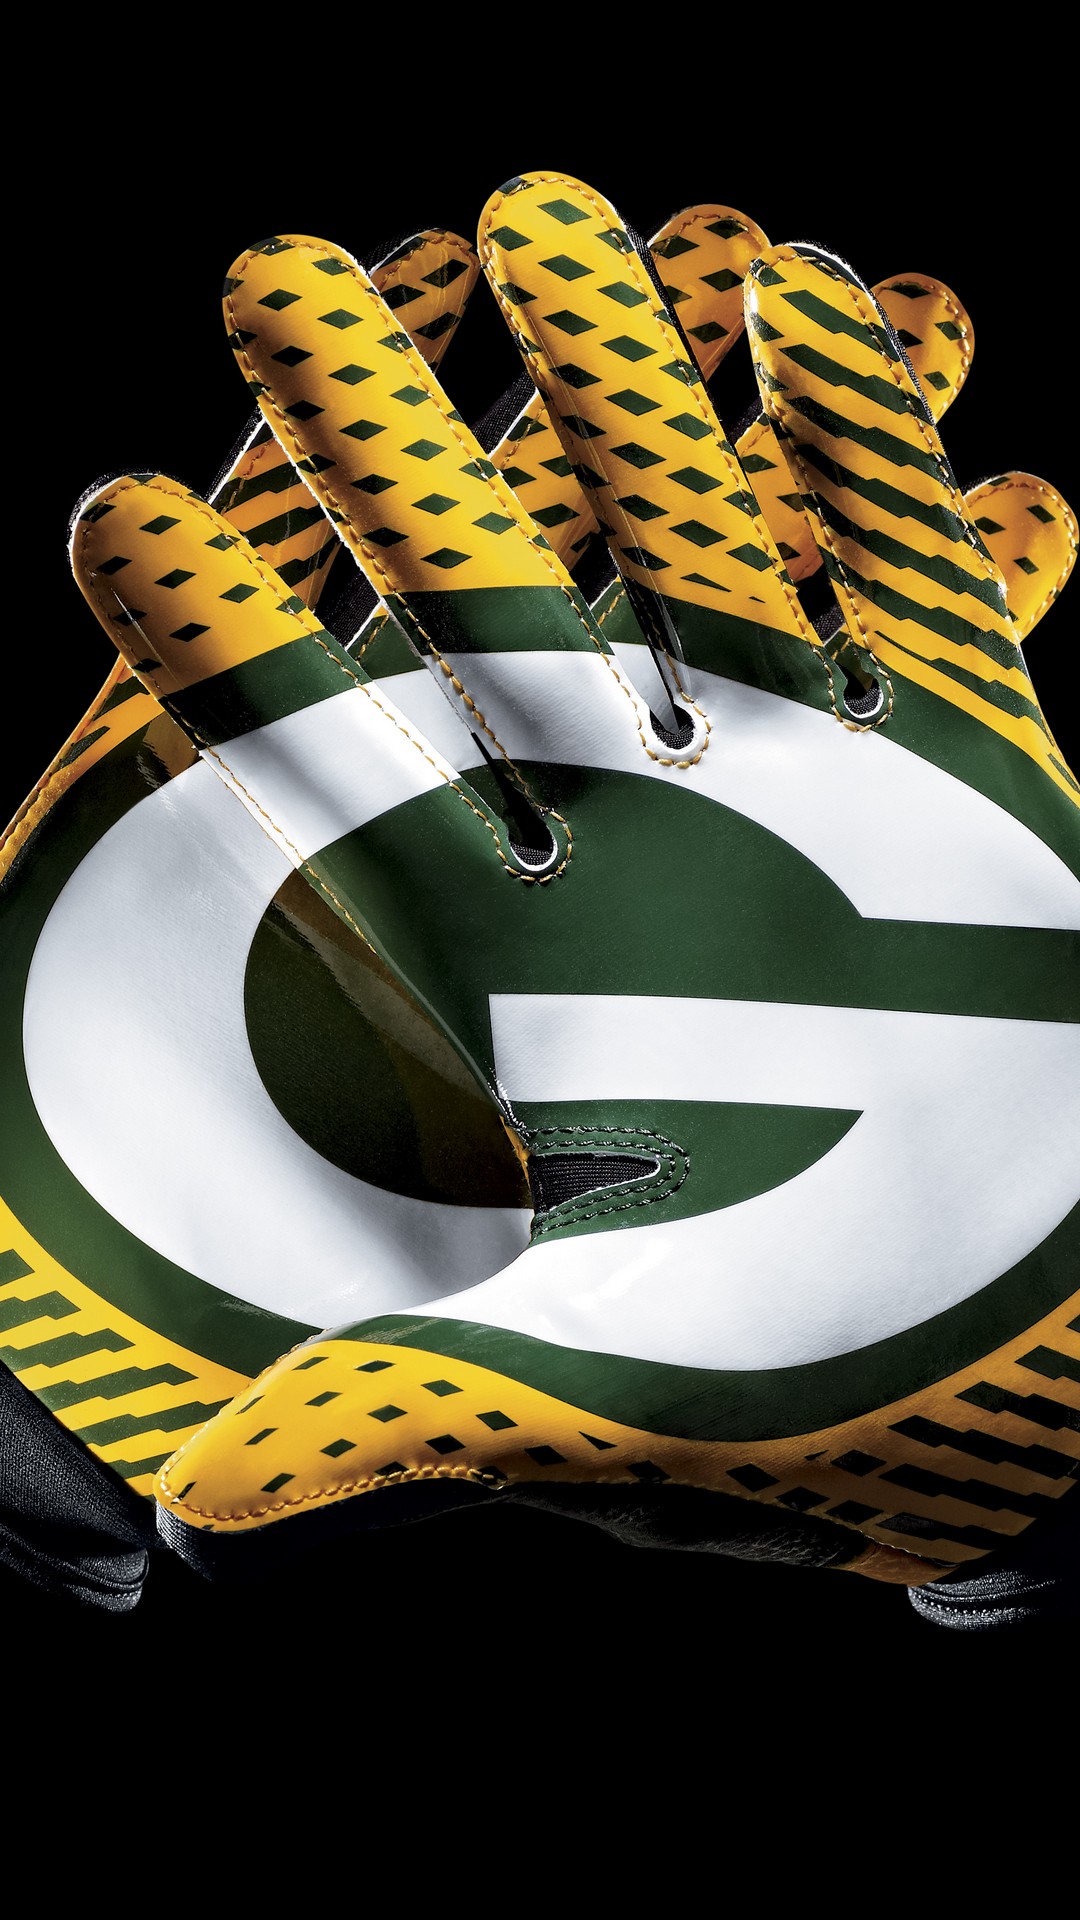 Green Bay Packers iPhone X Wallpaper with high-resolution 1080x1920 pixel. Download and set as wallpaper for Apple iPhone X, XS Max, XR, 8, 7, 6, SE, iPad, Android